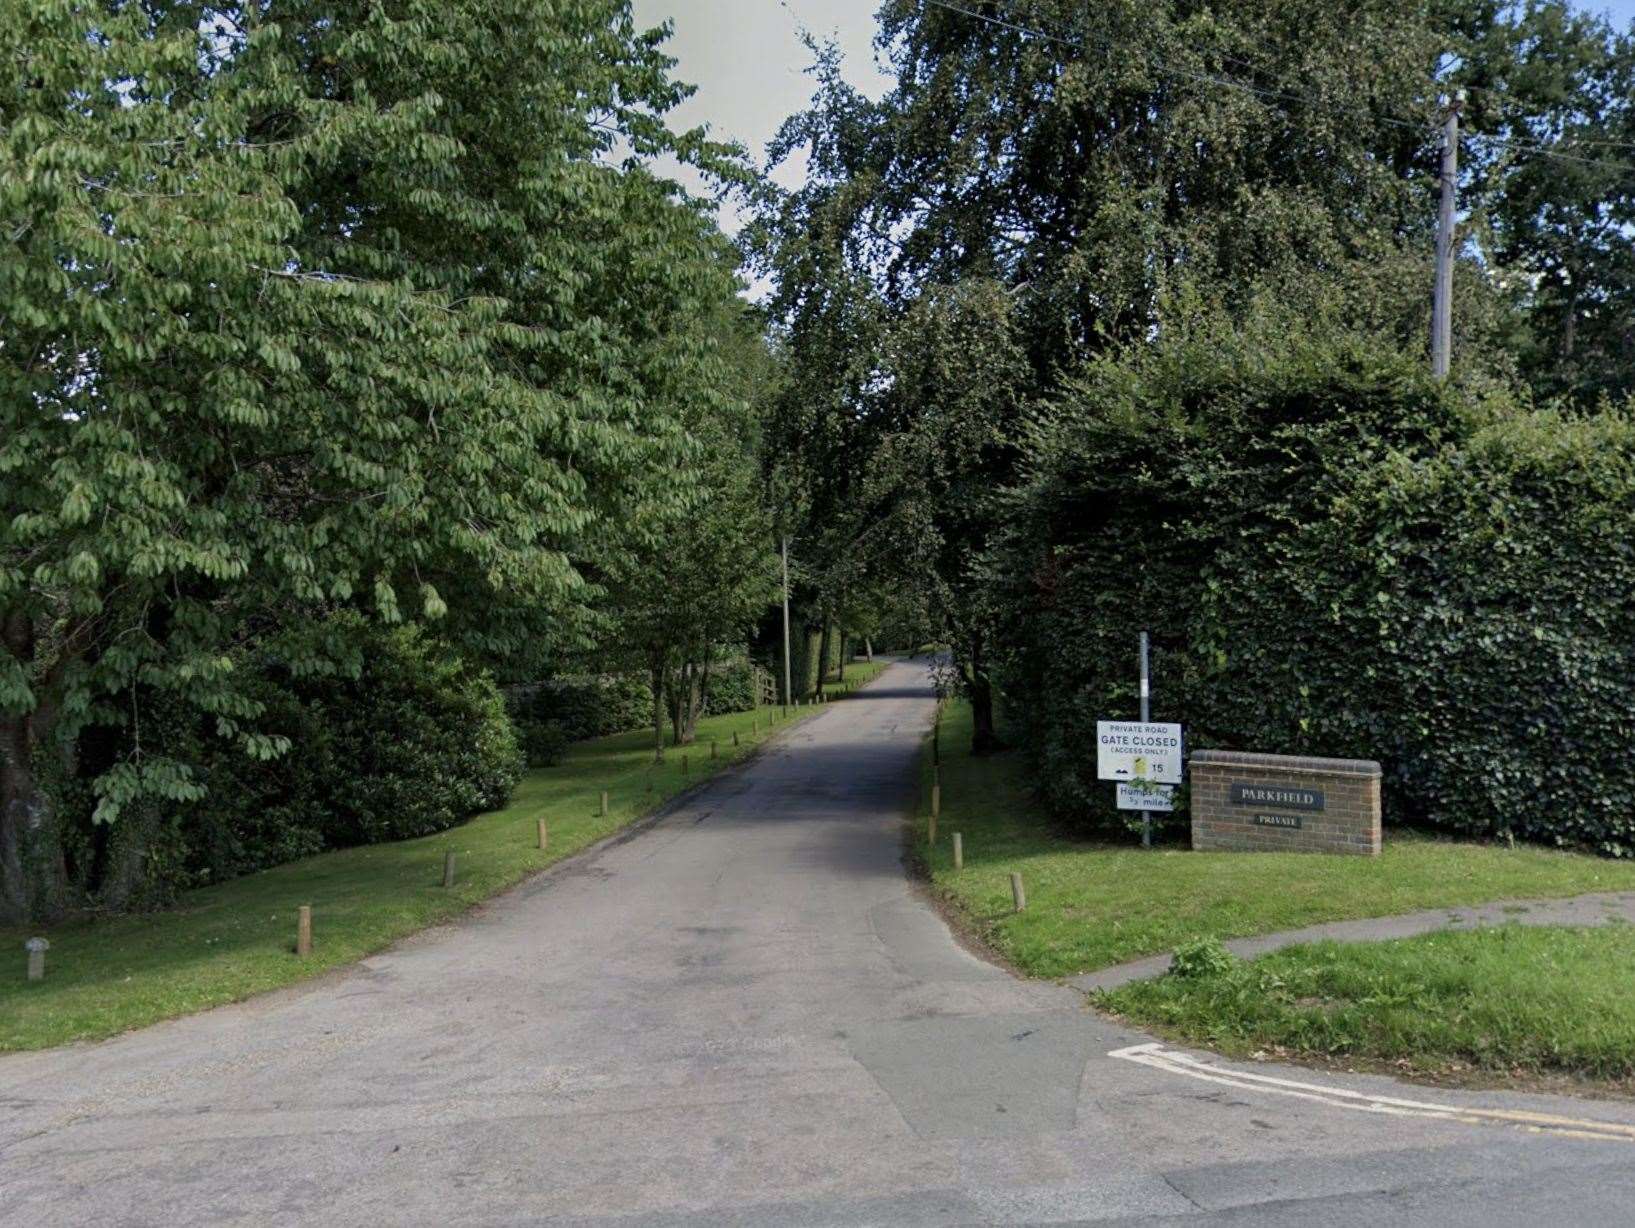 Police were called to a report of a burglary at a house in Parkfield, Sevenoaks. Picture: Google Maps